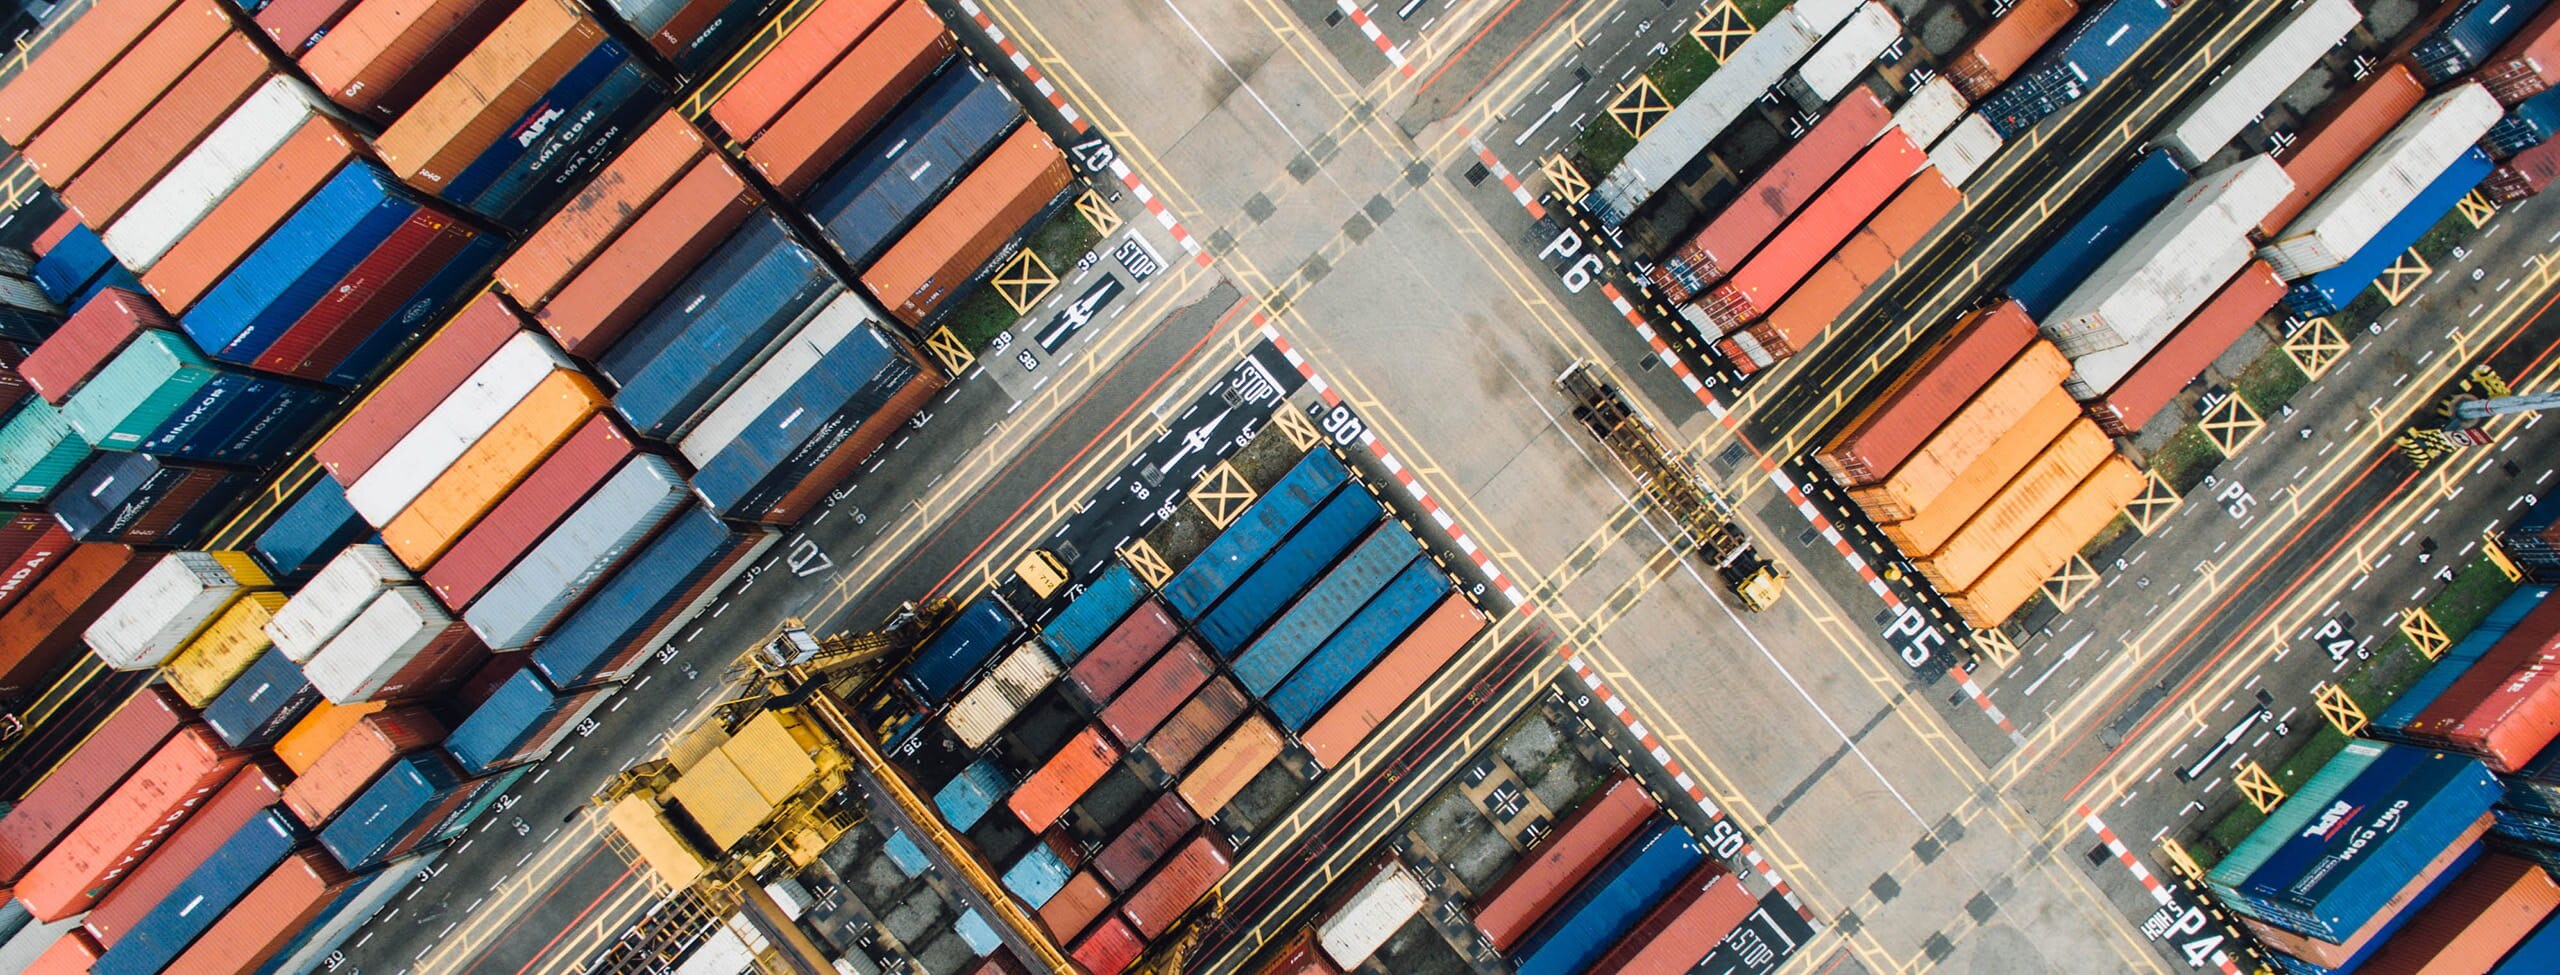 Shipping_Containers_Aerial_View_S_0353